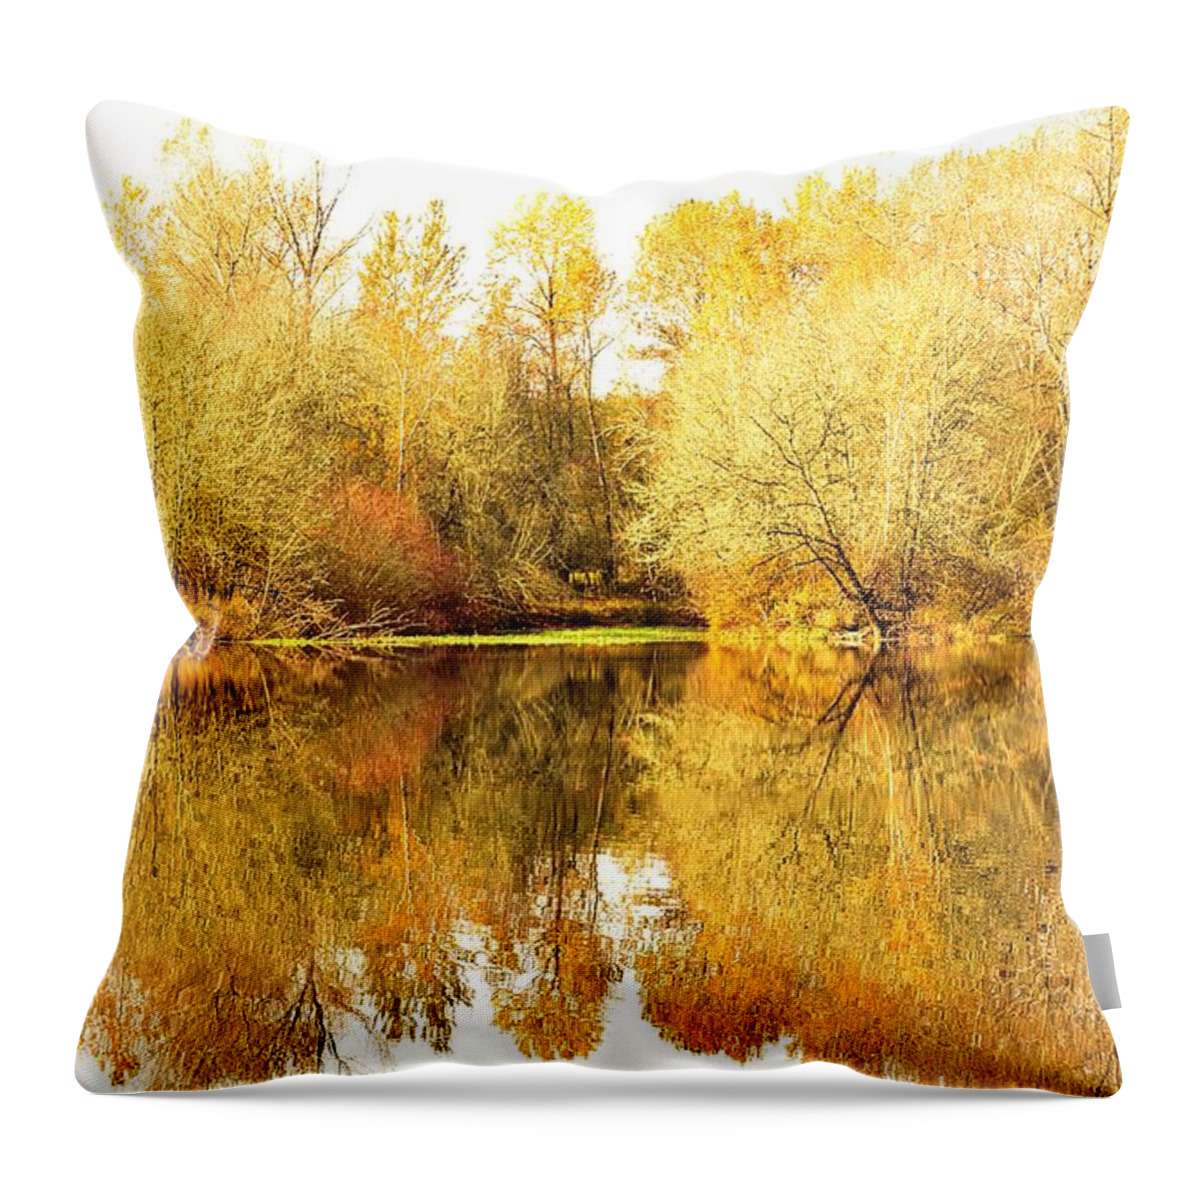 Landscape Fall Foliage Reflection Throw Pillow featuring the photograph Fall River Reflection by Michael Ramsey